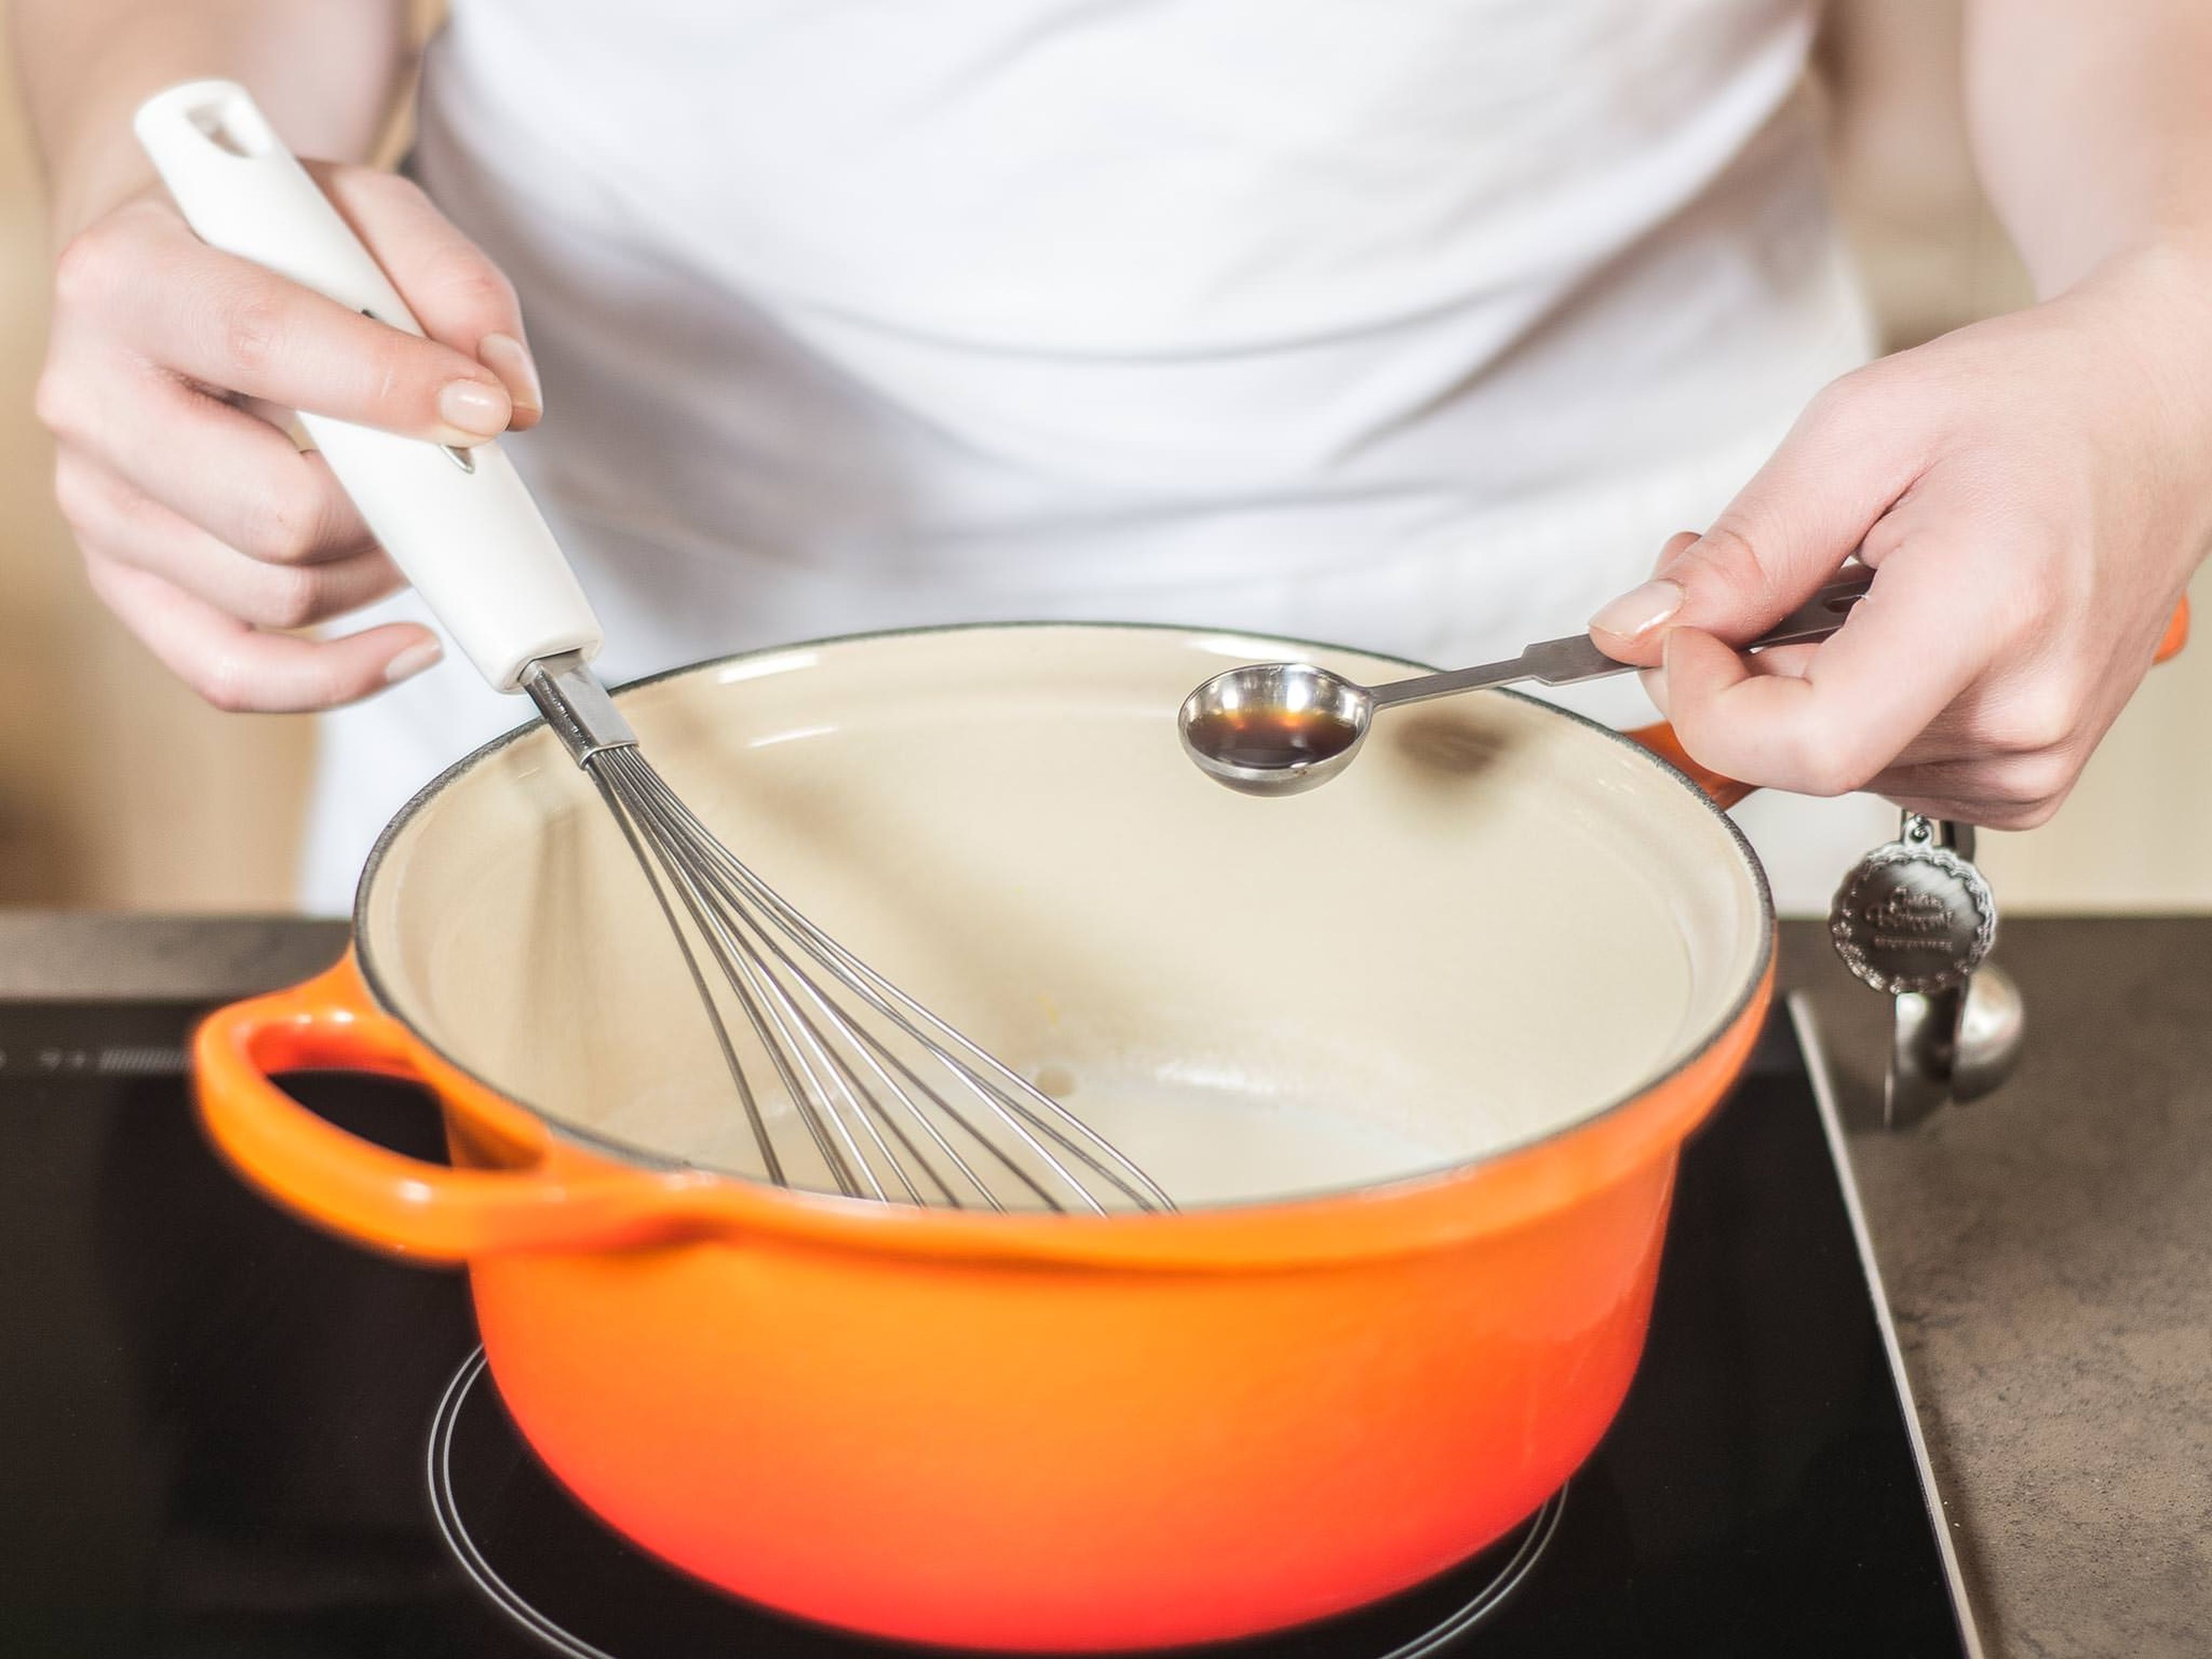 Boil milk and vanilla extract in a small sauce pan. Remove the softened gelatin from the water and add to the hot milk. Stir until gelatin has dissolved.